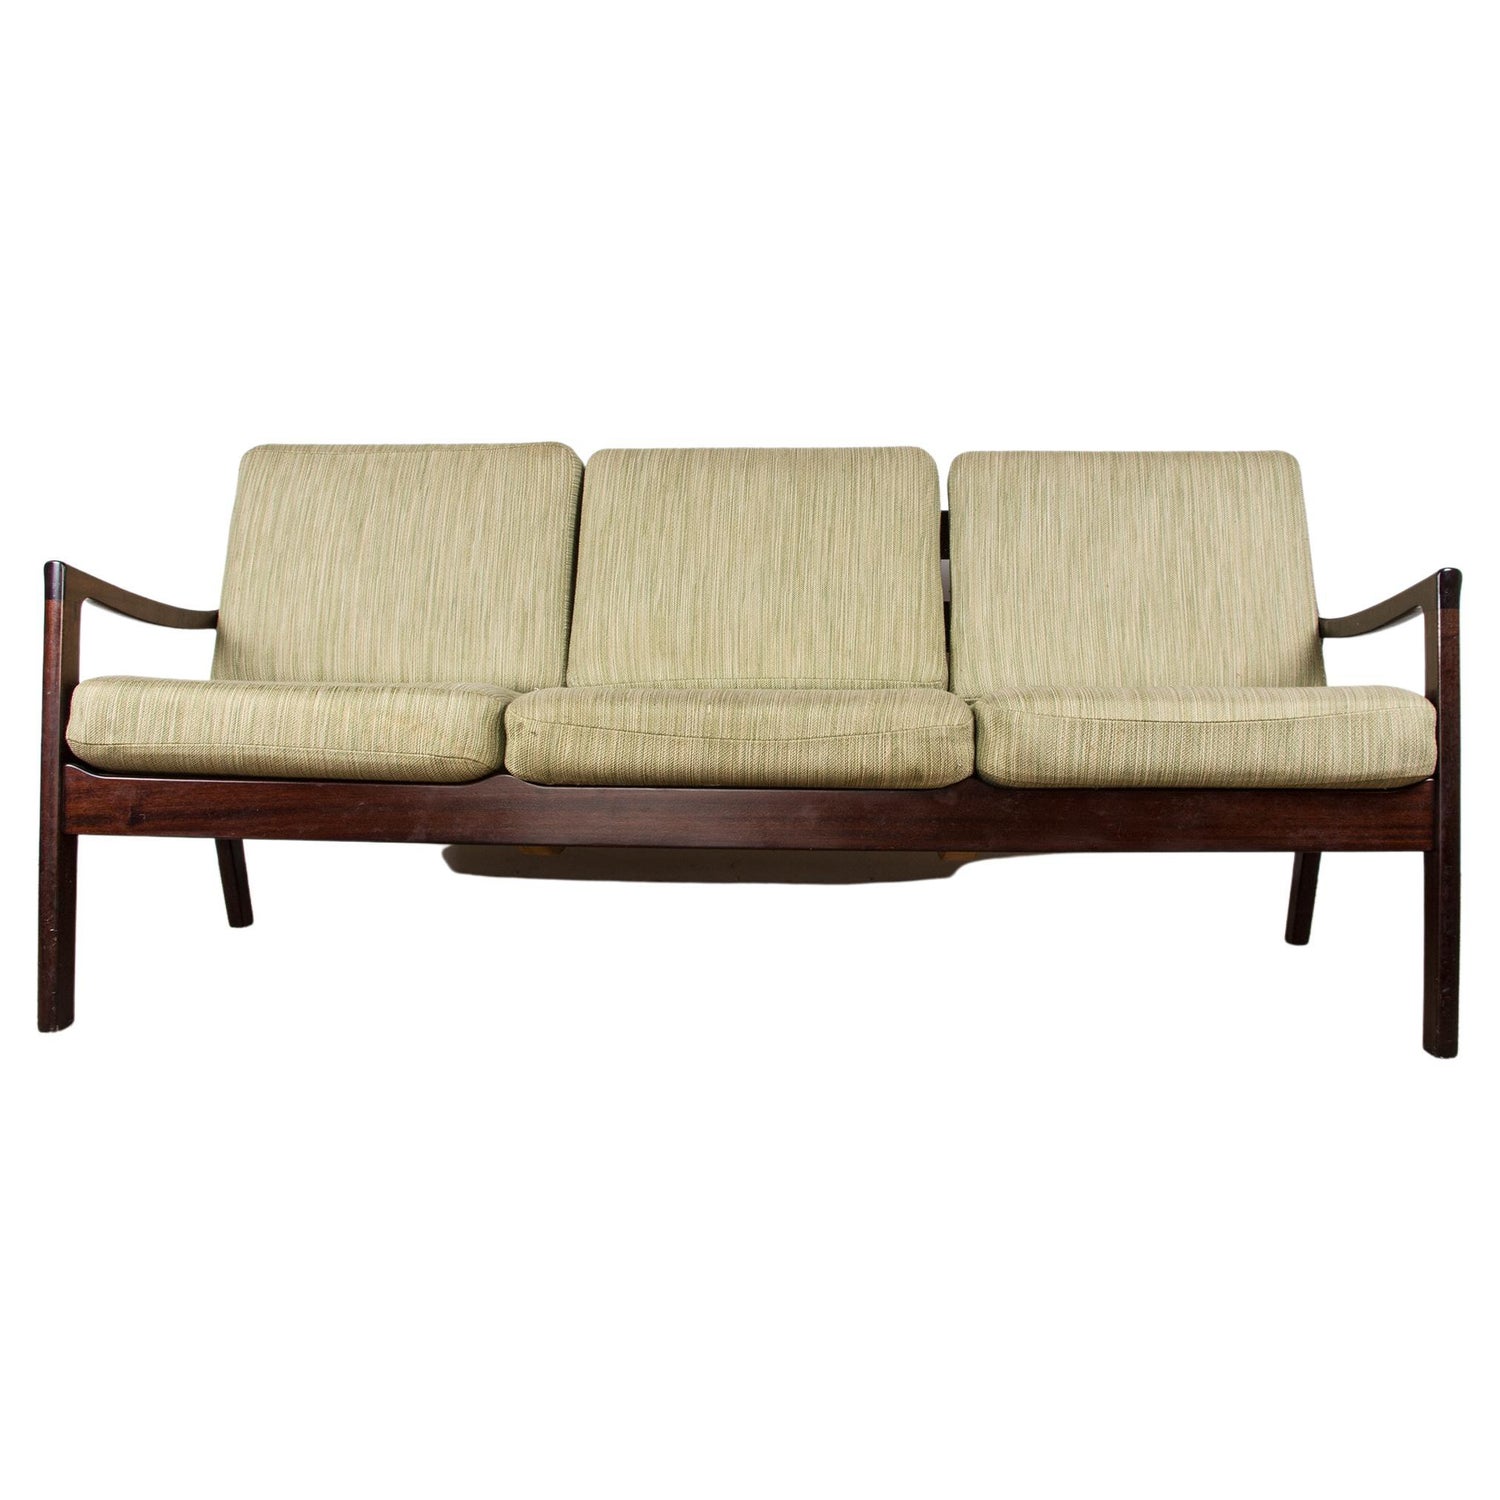 Vintage Danish Mid Century Mahogany Sofa by Ole Wanscher for Poul Jeppesen  For Sale at 1stDibs